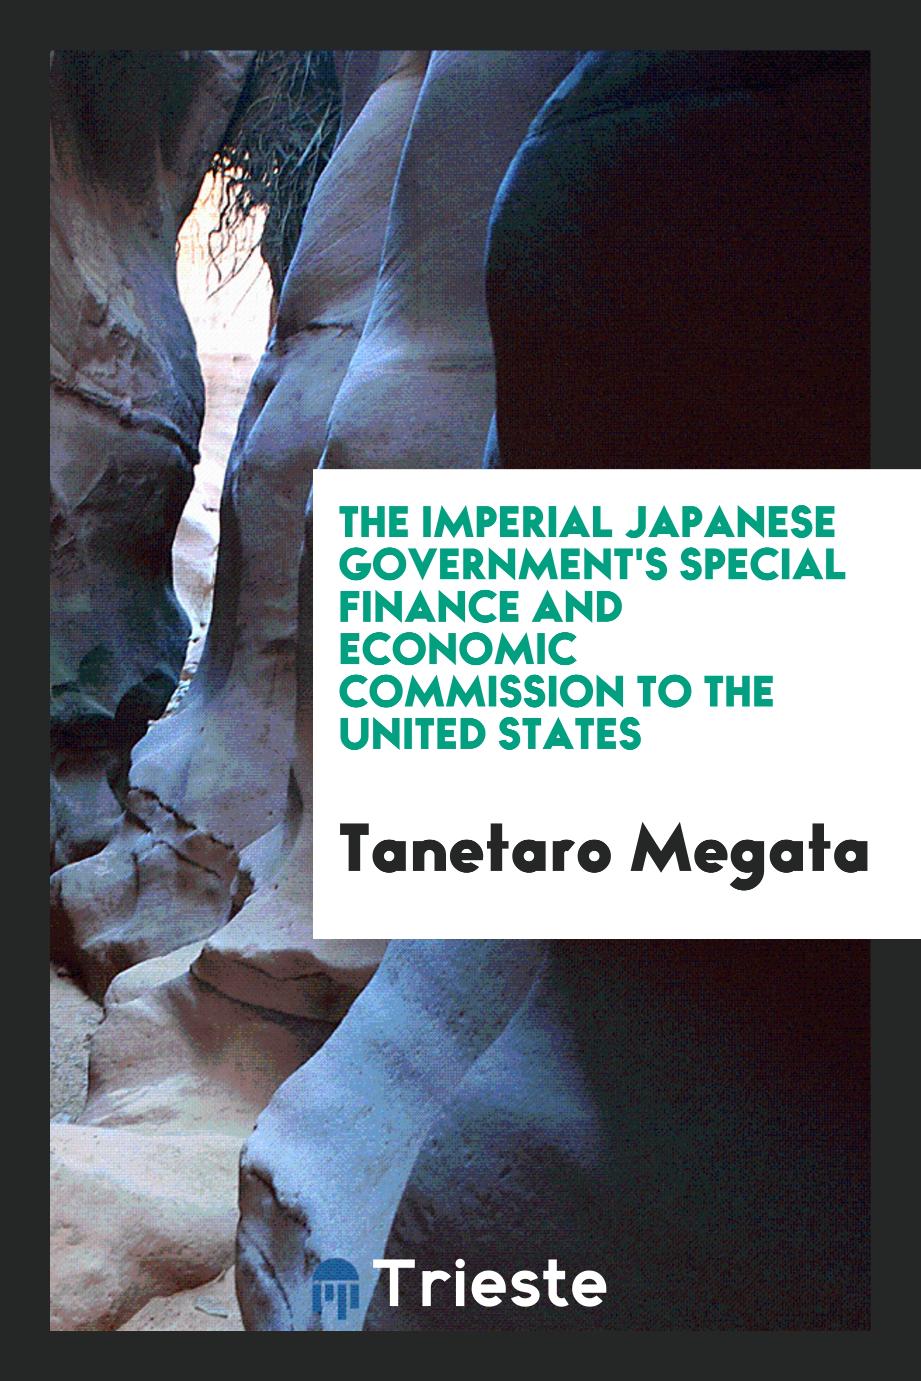 The Imperial Japanese government's Special finance and economic commission to the United States